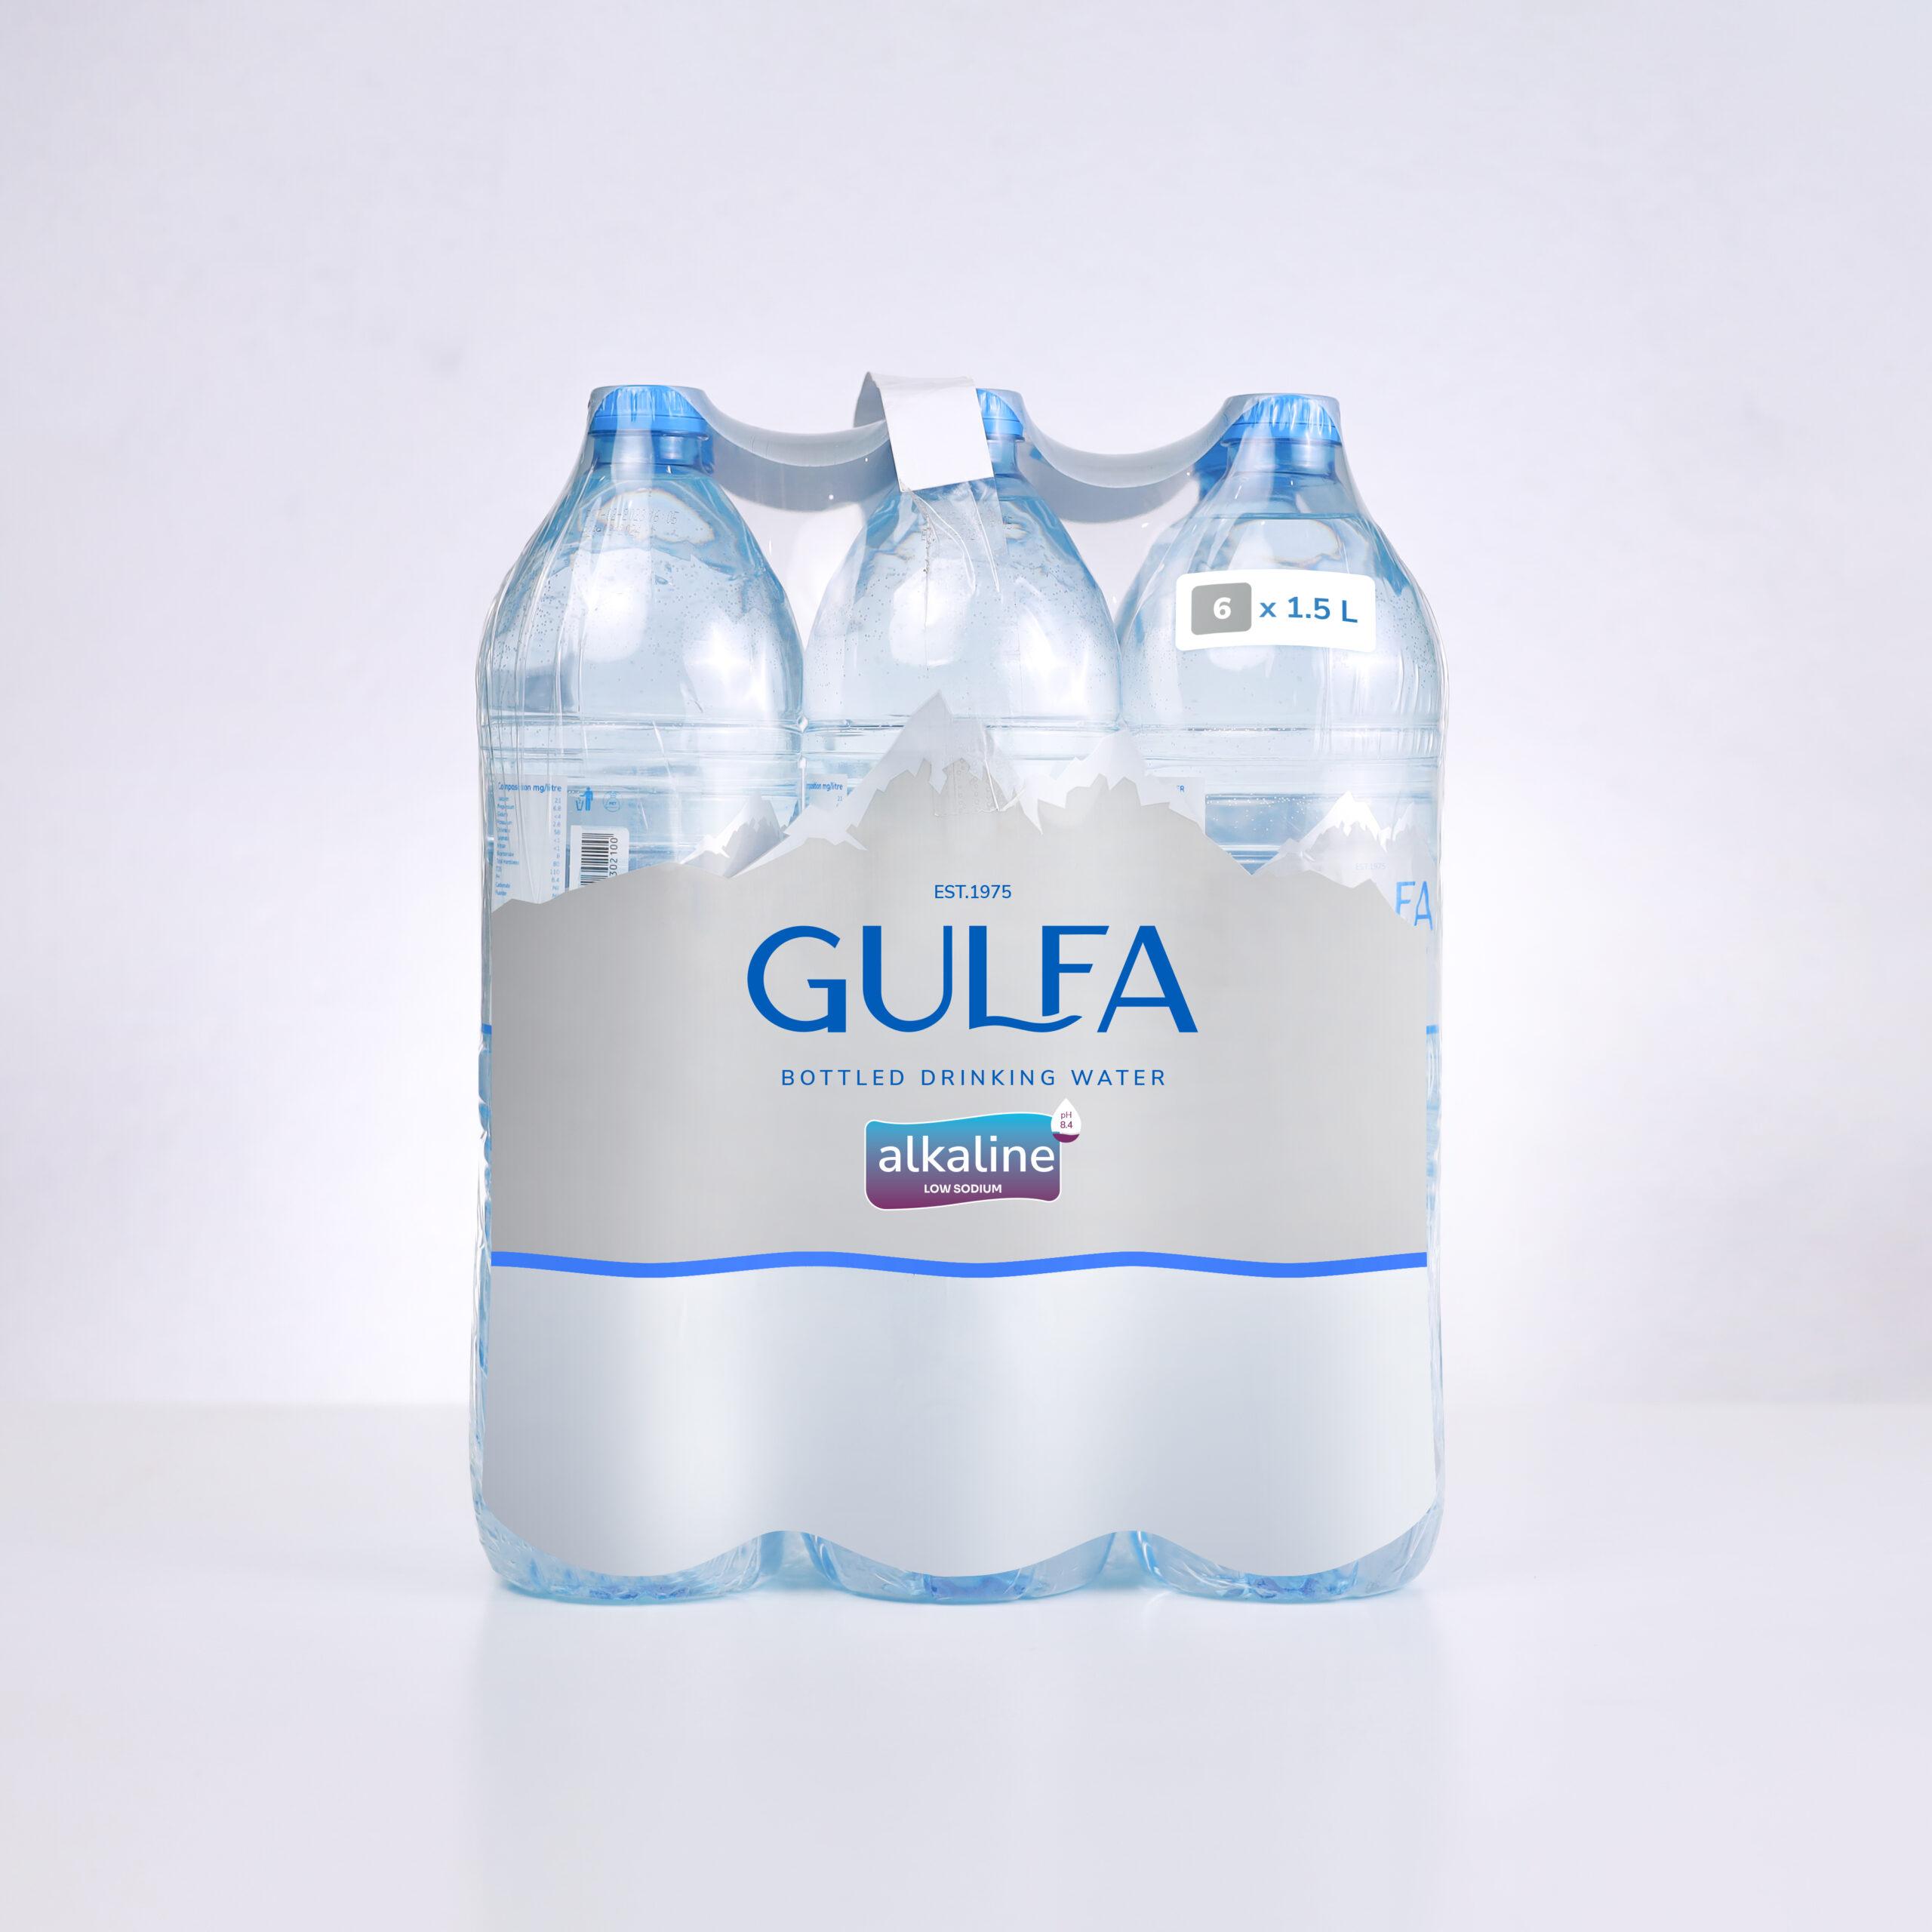 Product Gulfa Alkaline 1.5L X 6 Bottled Drinking Water - Gulfa Mineral Water & Processing Industries LLC image